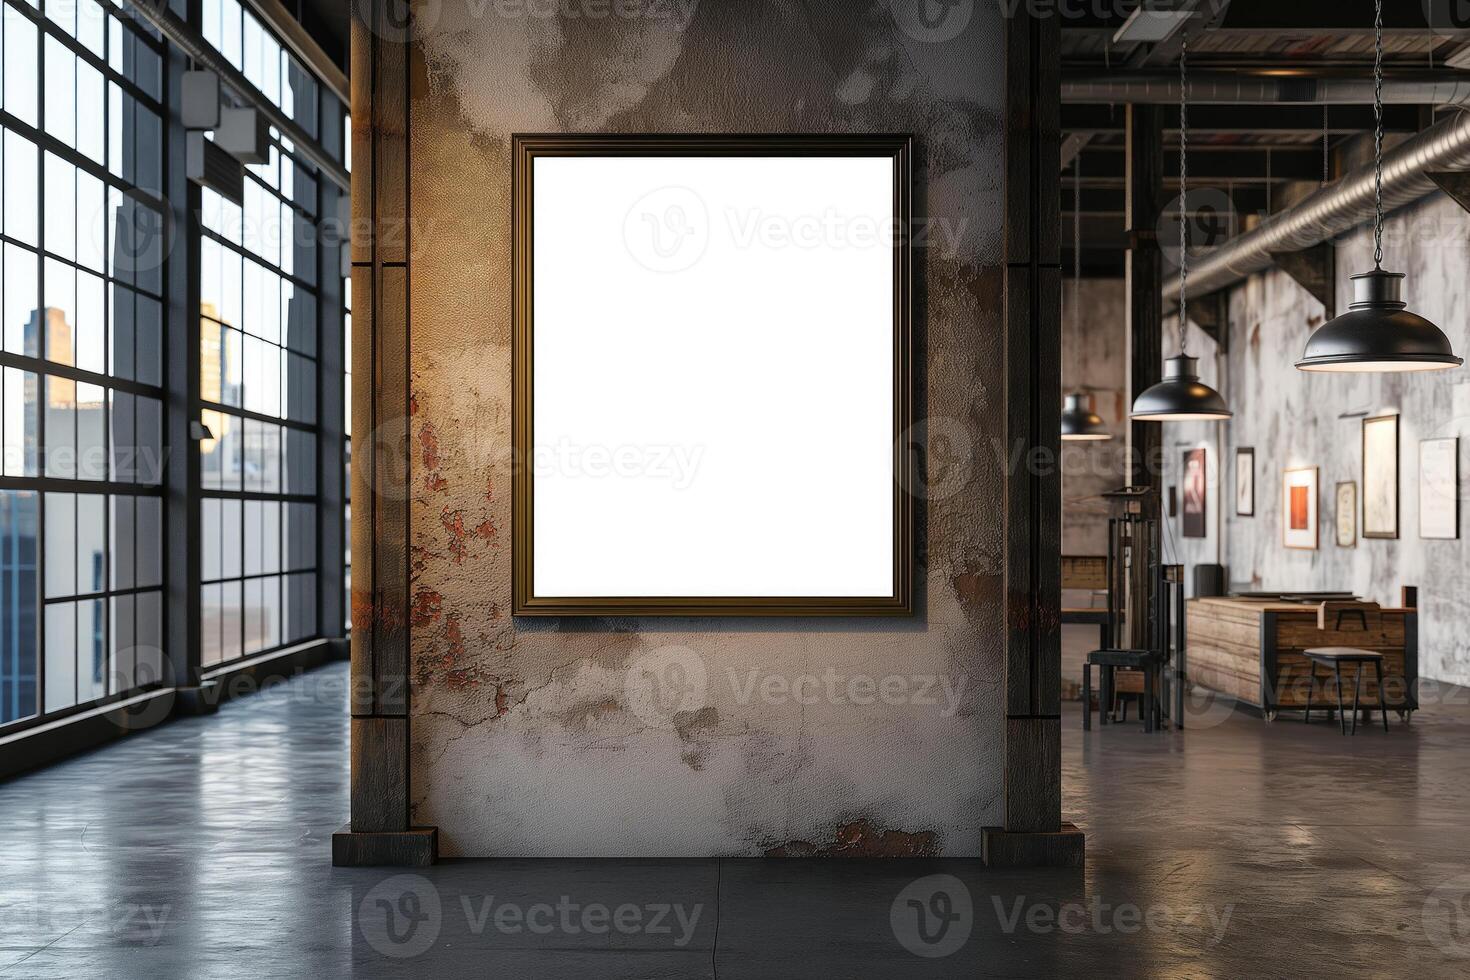 A mockup of a blank square photo frame hanging in the middle of wall with Industrial, urban, loft-style decoration